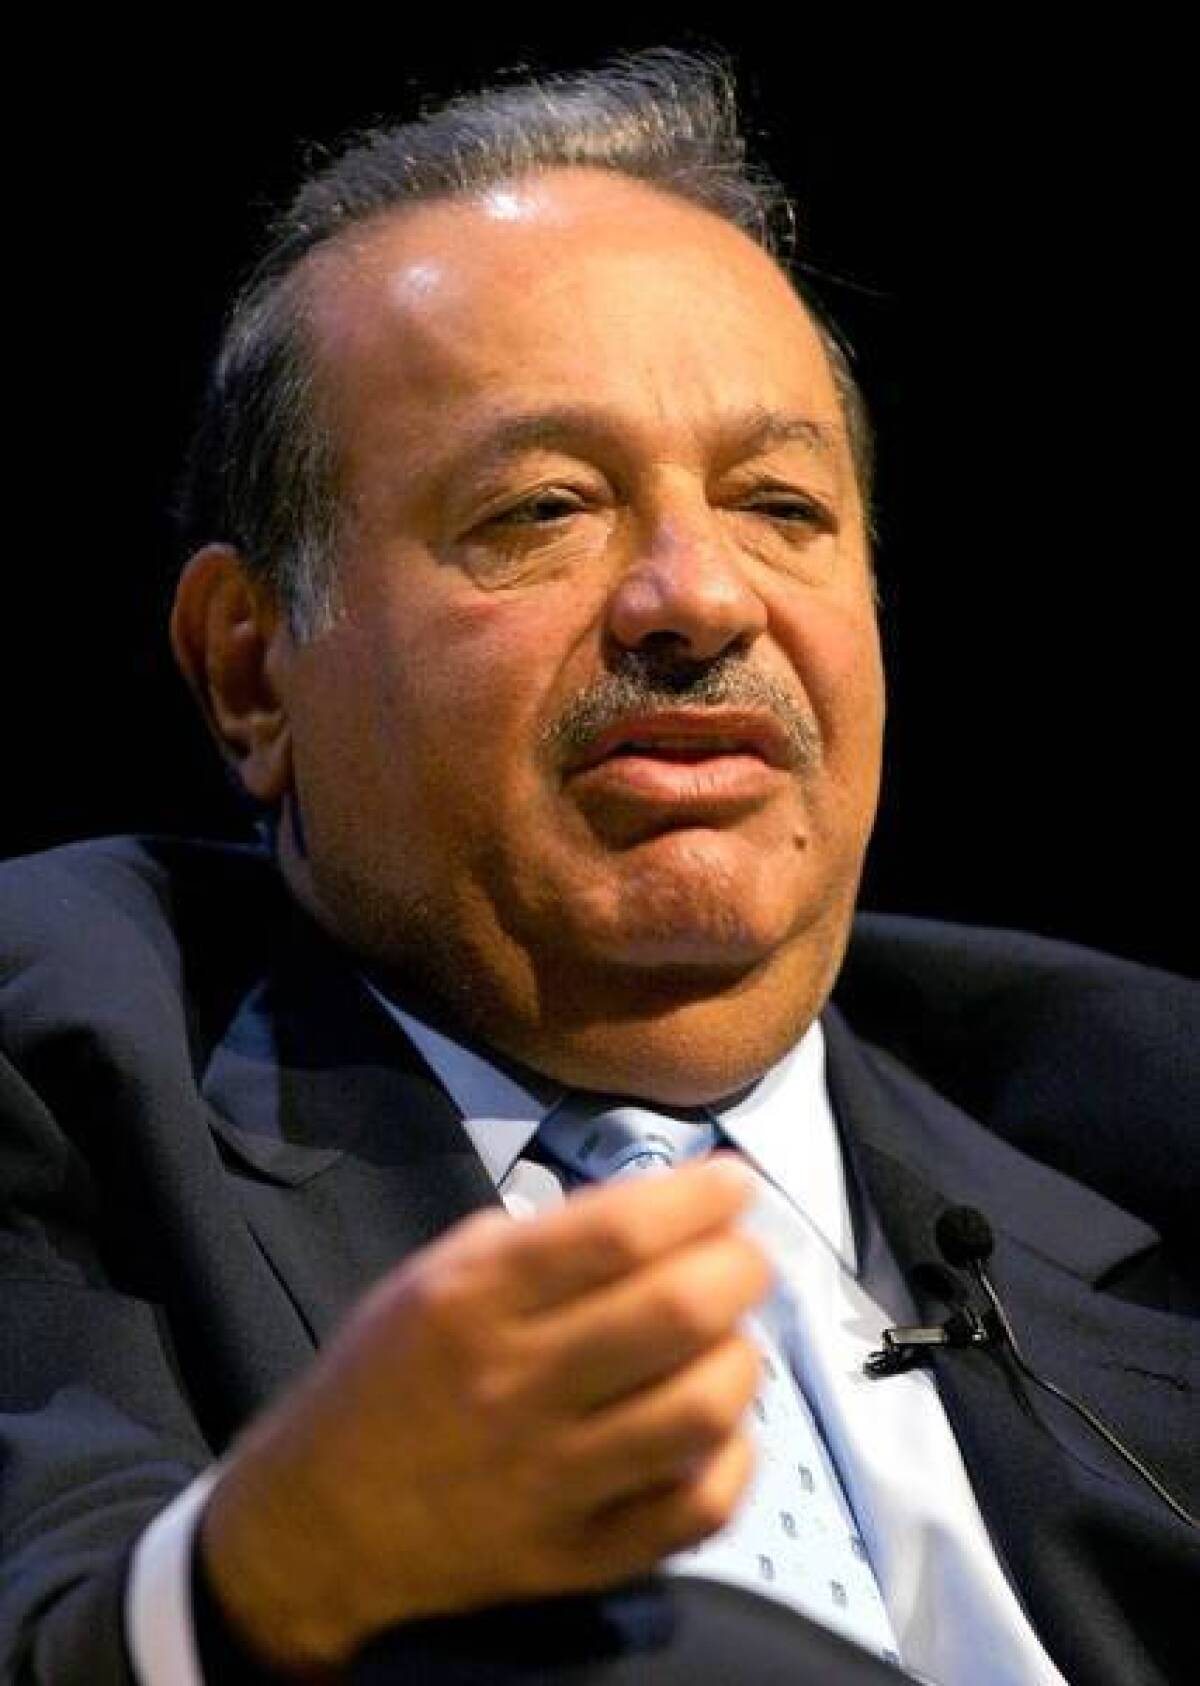 Telmex, owned by Carlos Slim, pictured in 2005, provides about 80% of fixed telephone lines in Mexico.